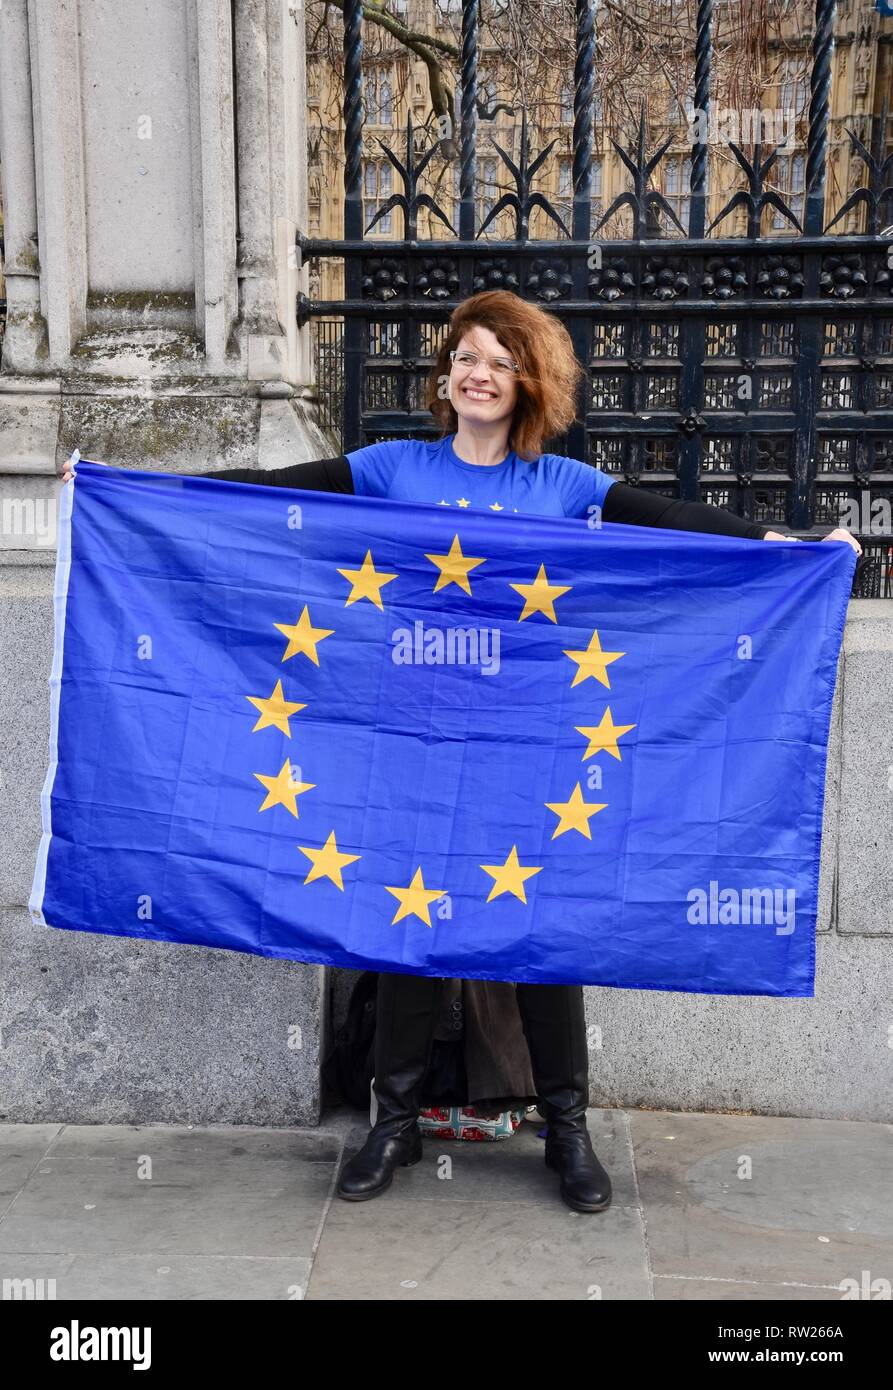 4th Mar 2019. A solitary protester holding an EU flag demonstrates against Brexit and in favour of the European Union.Houses of Parliament,Westminster,London.UK Credit: michael melia/Alamy Live News Stock Photo